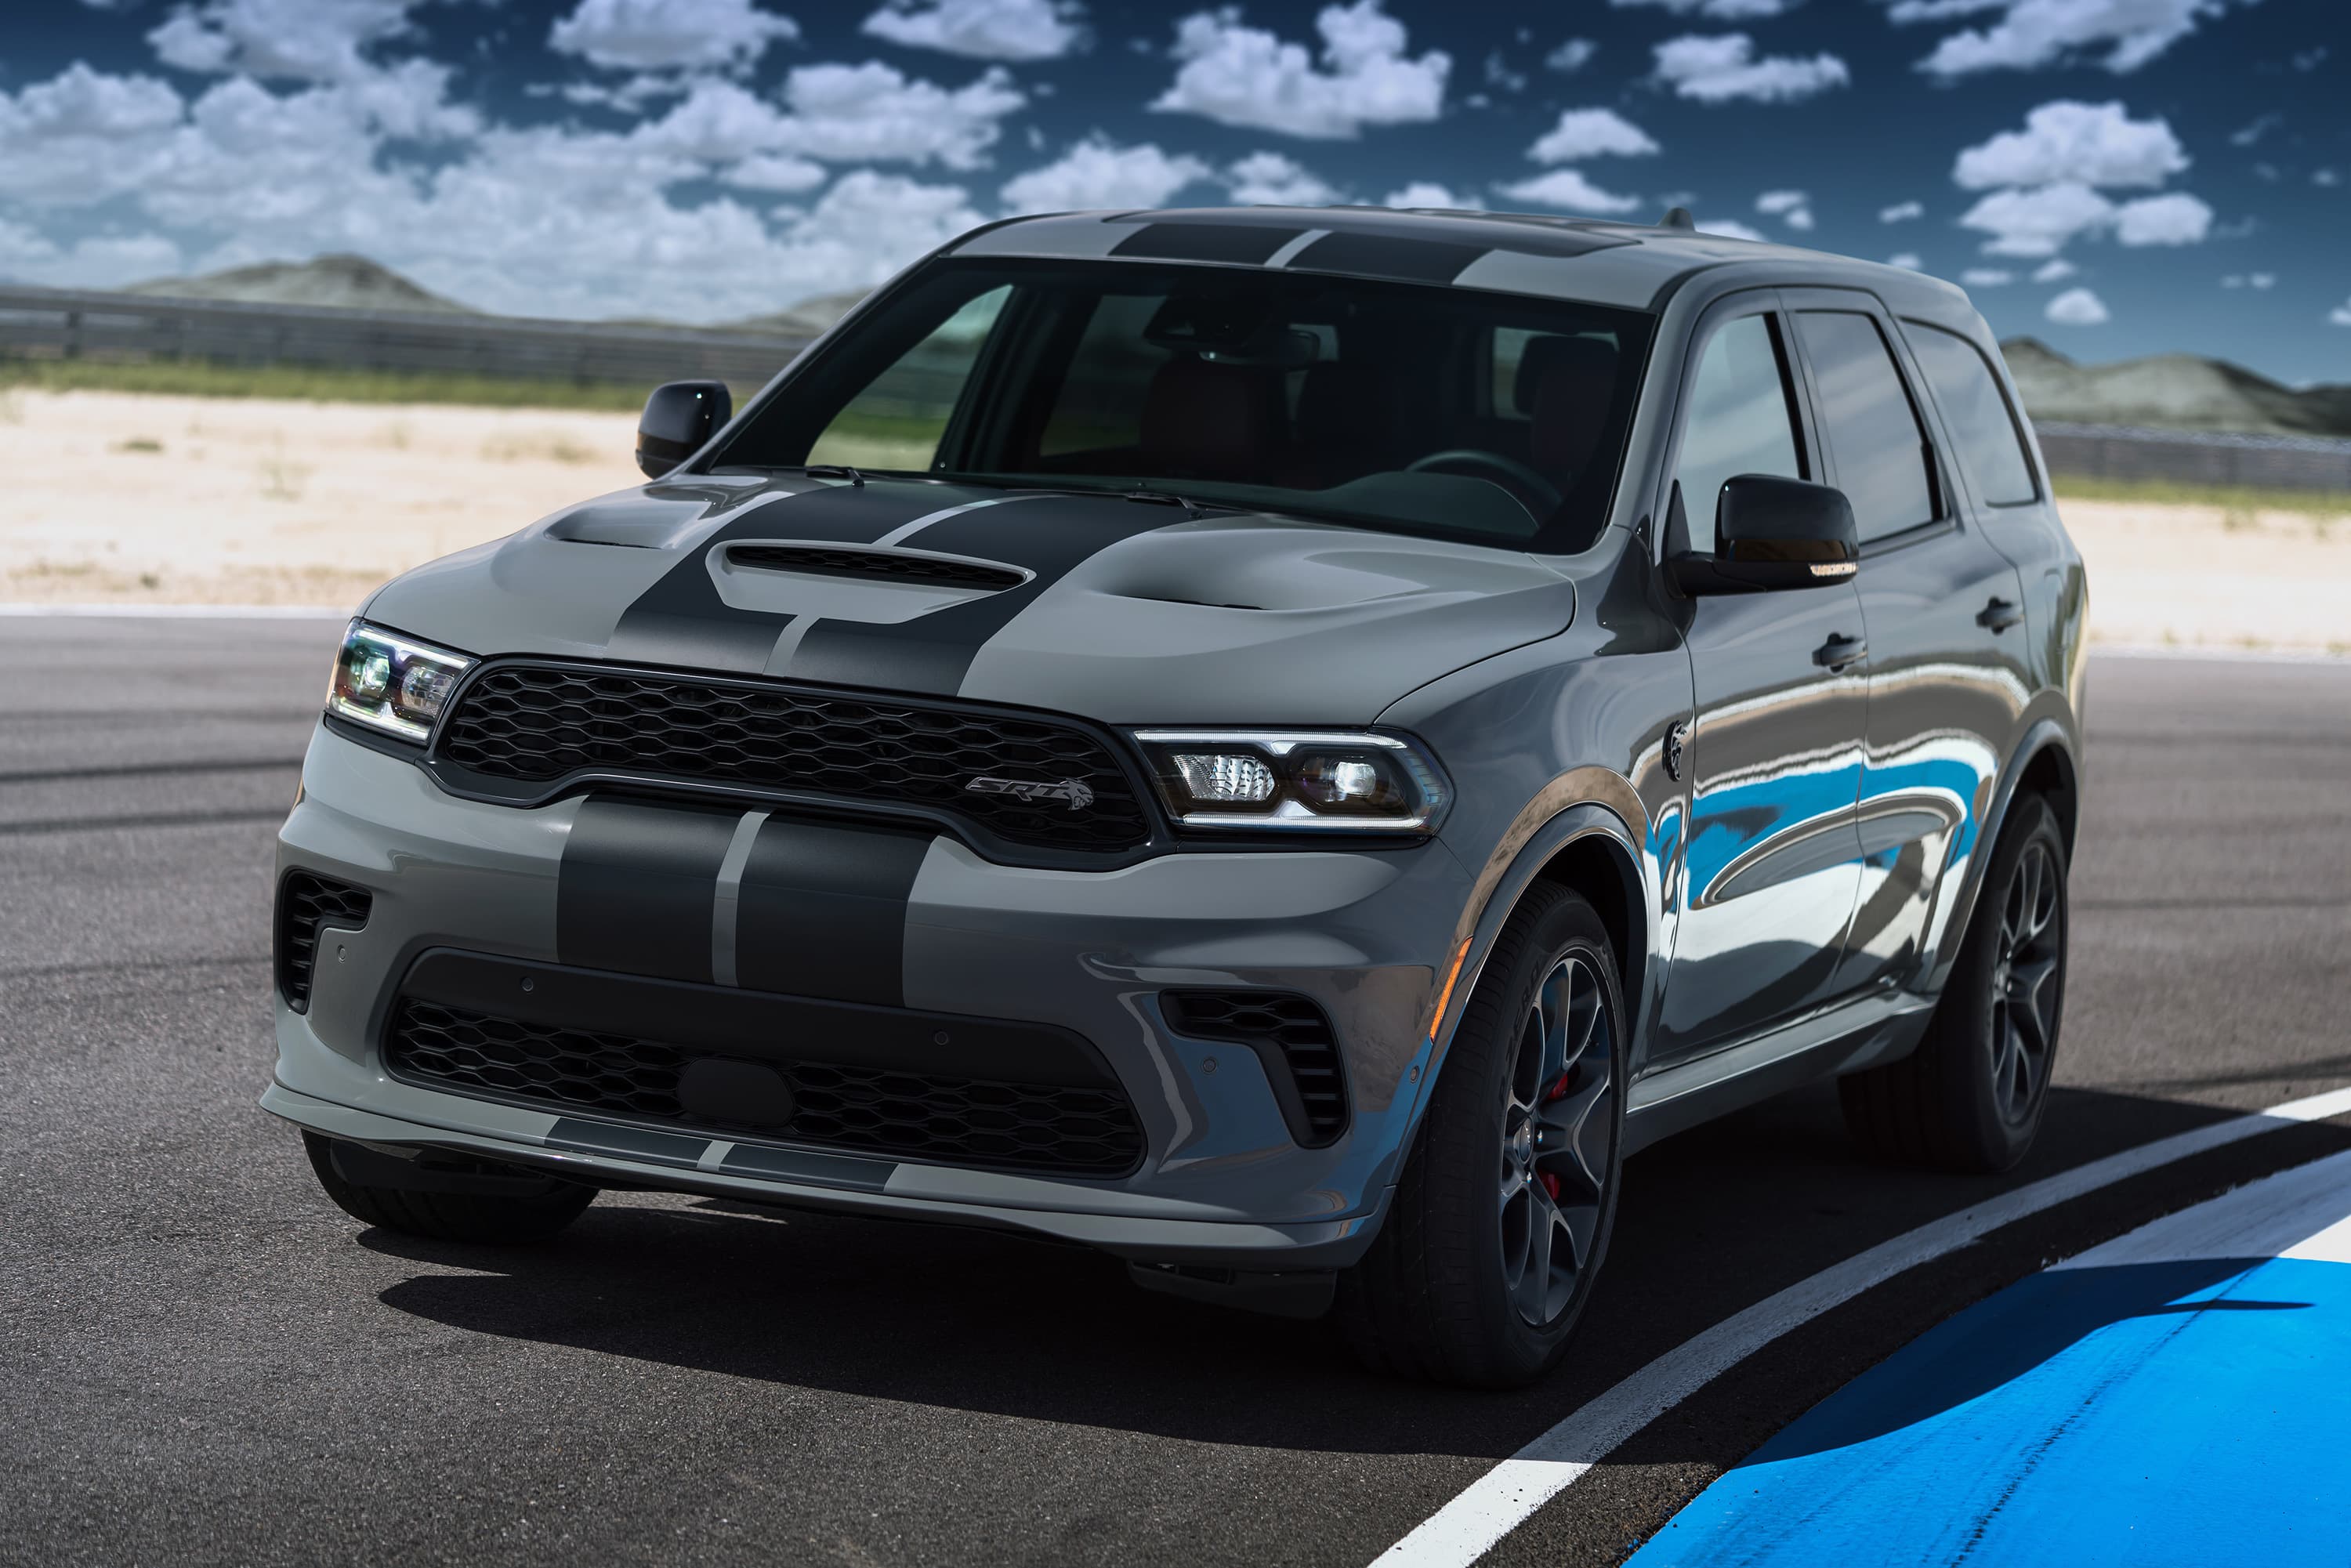 Dodge Durango Srt 2021 Review and Release date